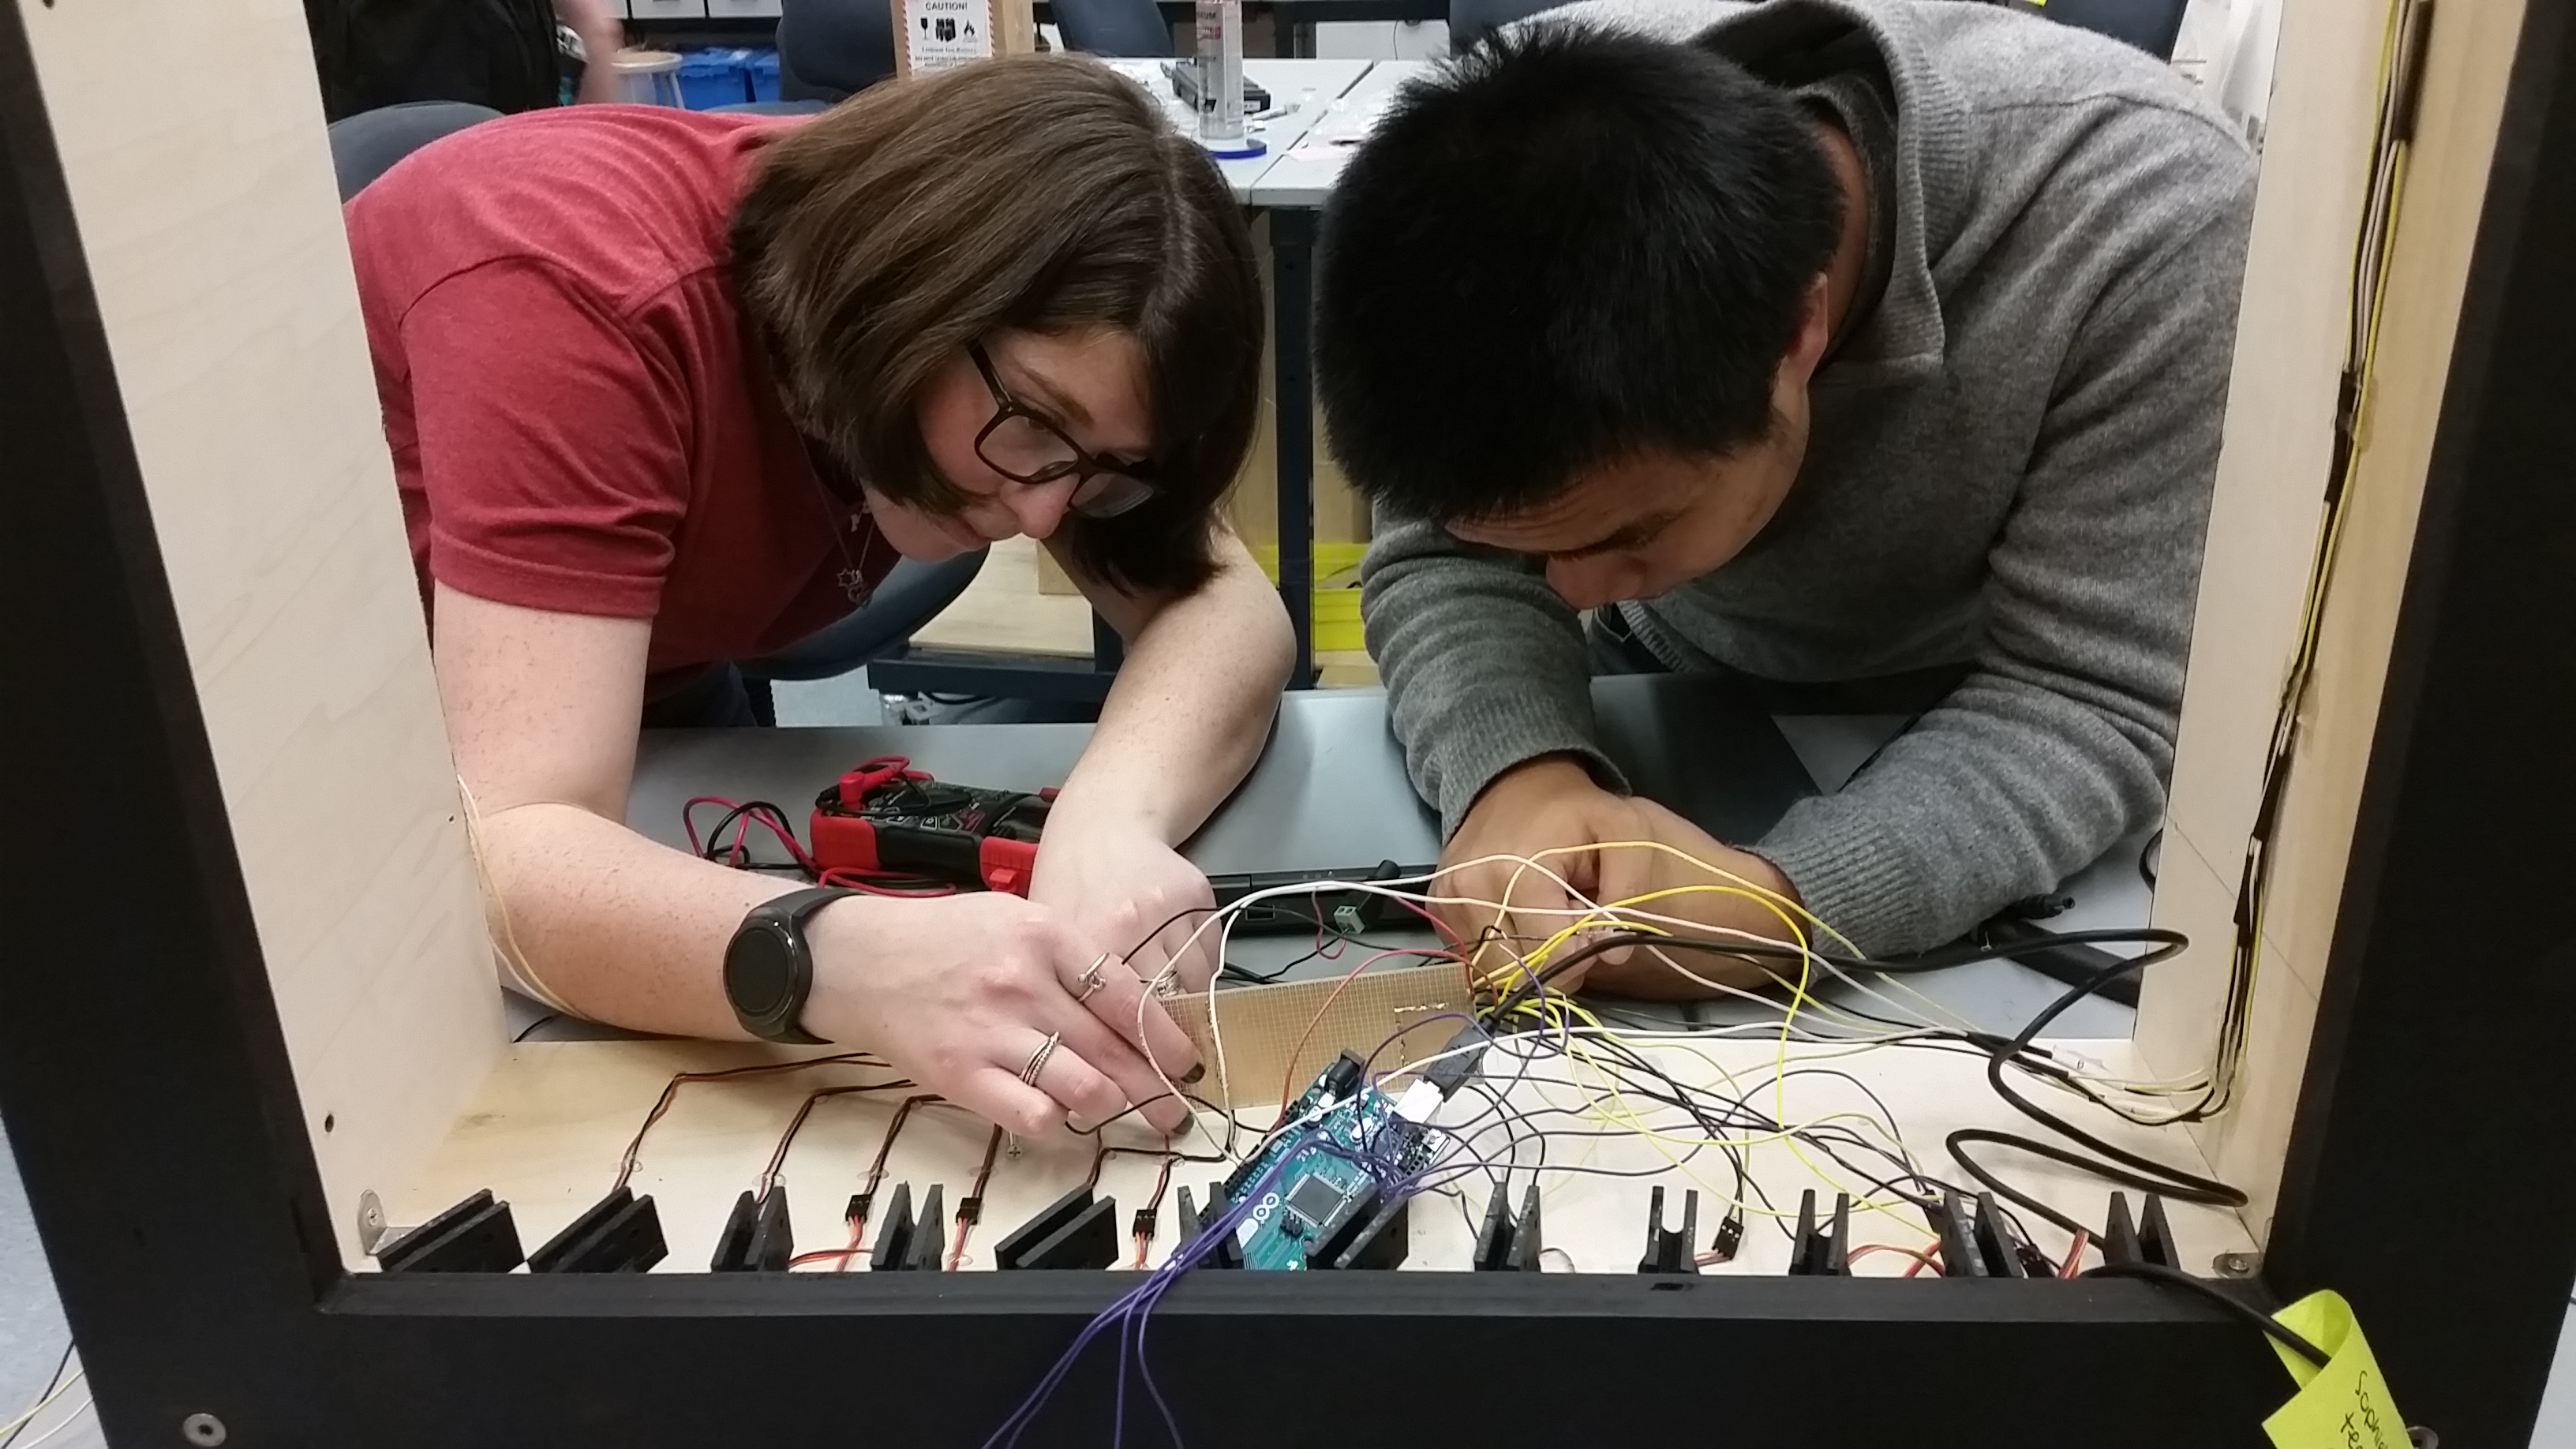 The two members of the ECE subteam hard at work debugging circuit wiring problems